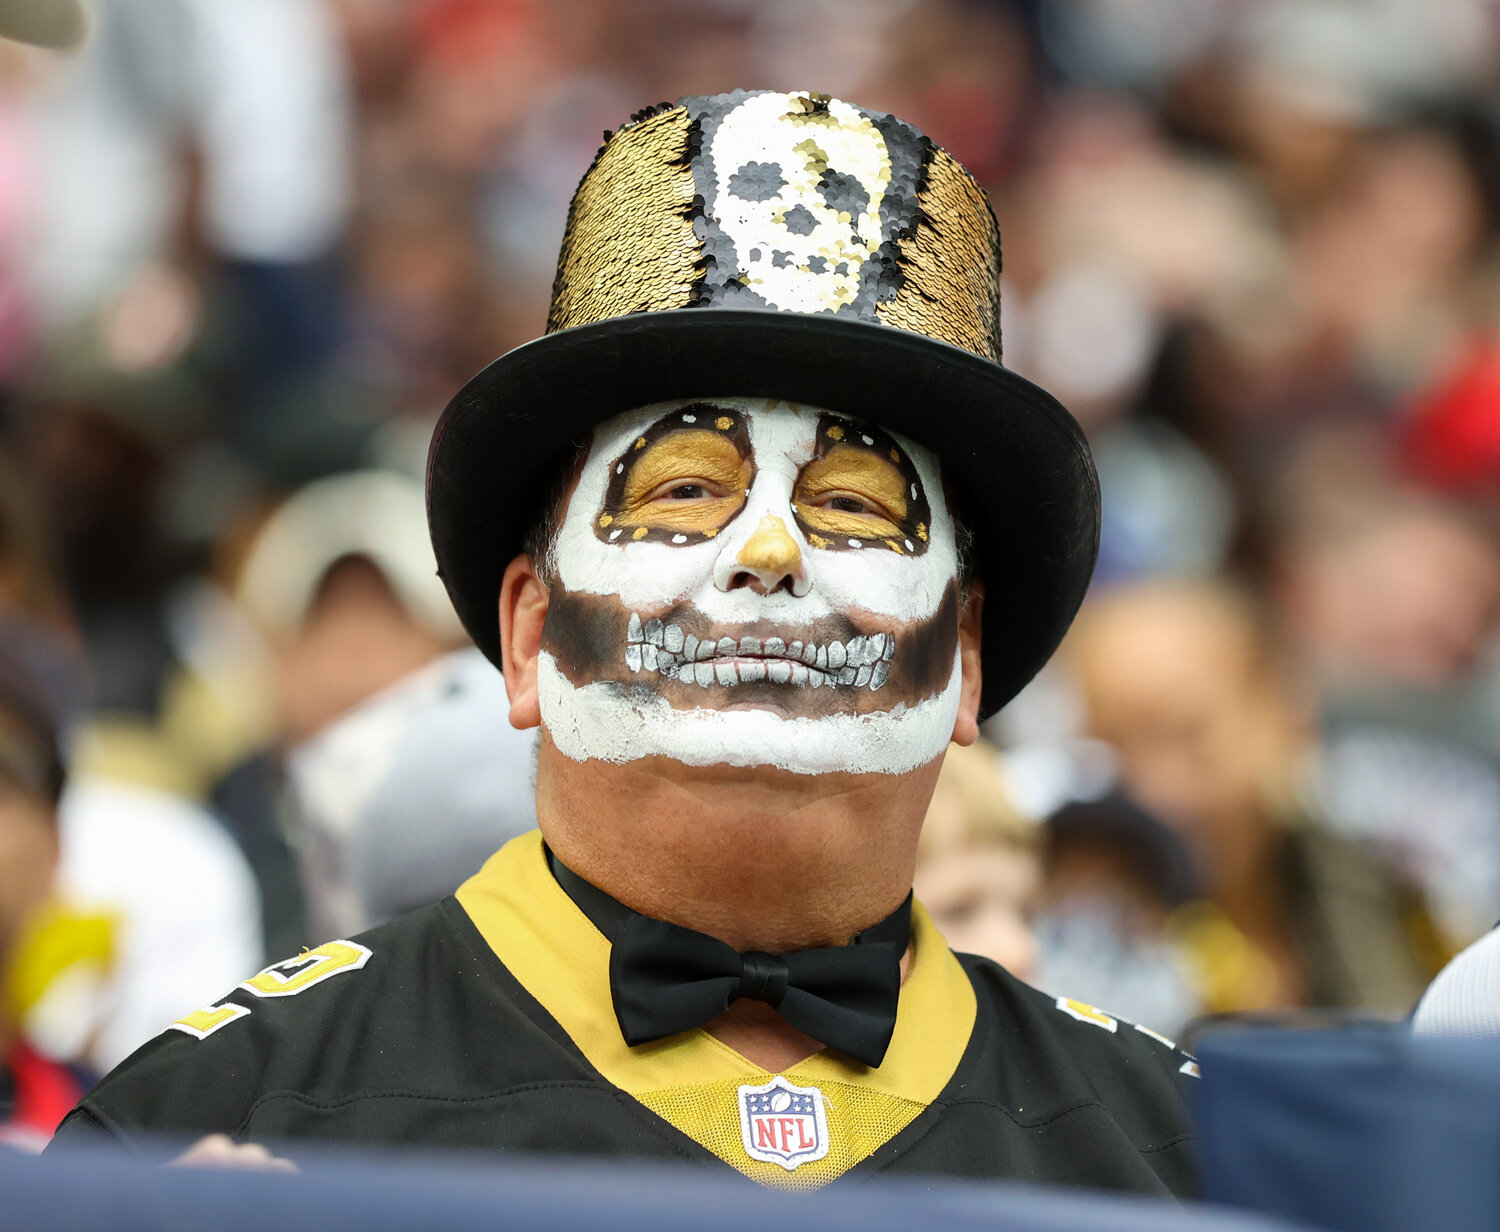 A New Orleans Saints fan during an NFL game between the Texans and the Saints on October 15, 2023 in Houston. The Texans won, 20-13.